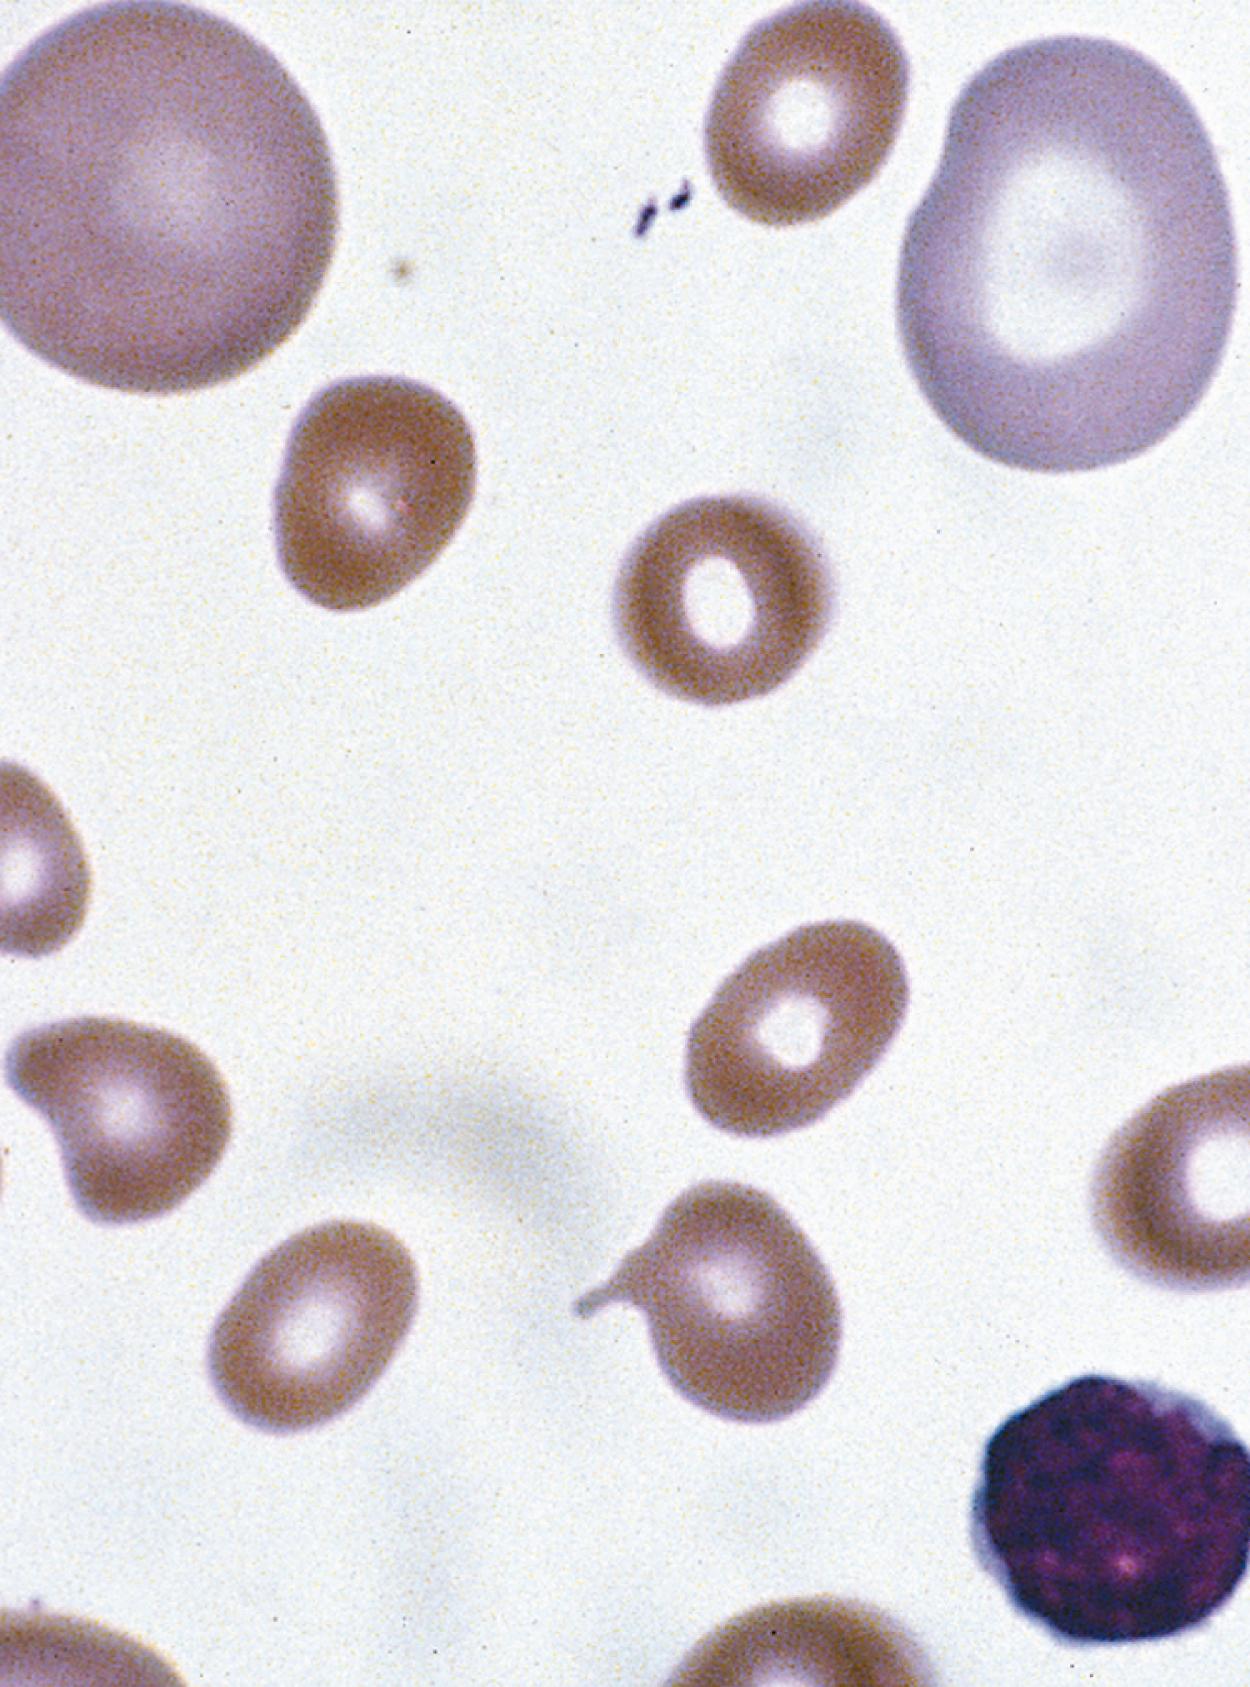 Fig. 12.10, Megaloblastic anemia. This peripheral blood smear demonstrates an enlarged red blood cell (RBC; macrocyte) at the upper left of the photograph. The RBC is much larger than the normal small lymphocytes in the same field in this patient with megaloblastic anemia.